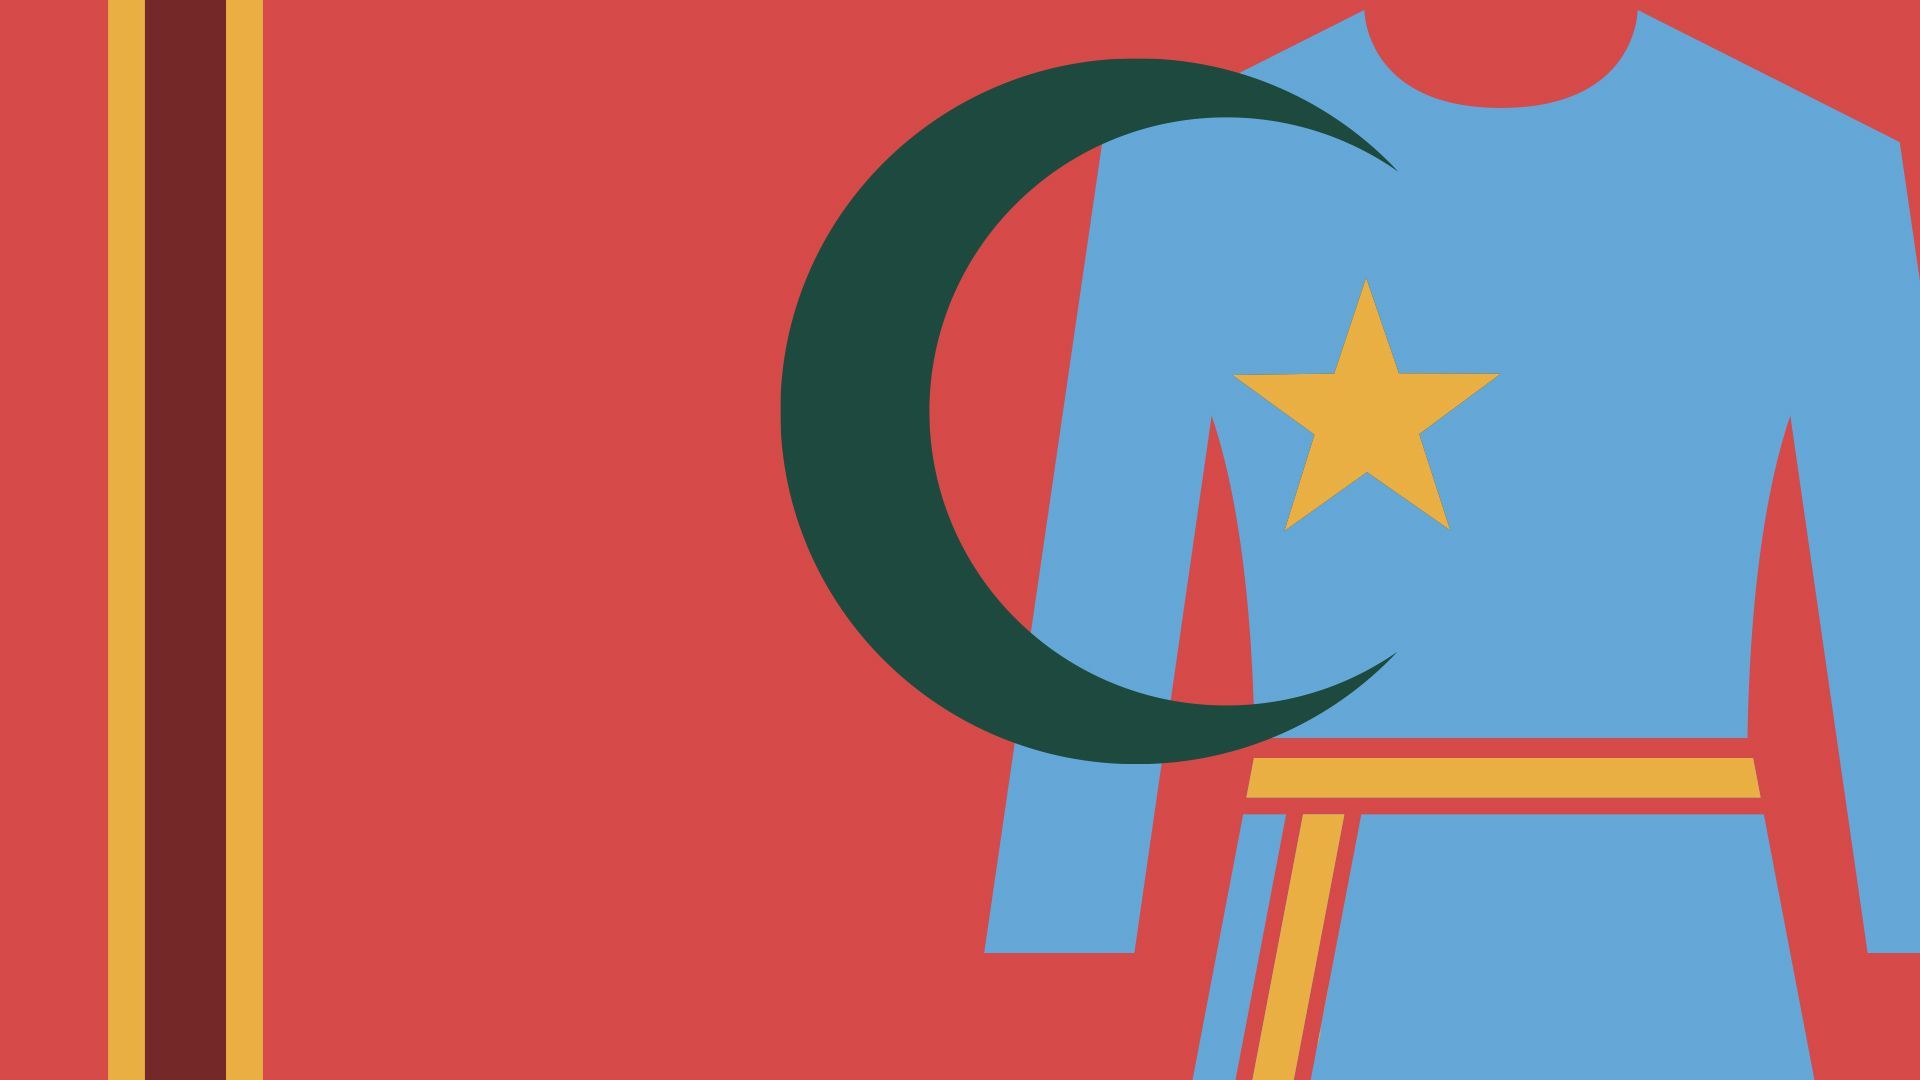 Illustration of a uniform with the Islamic crescent and star stylized in vector art